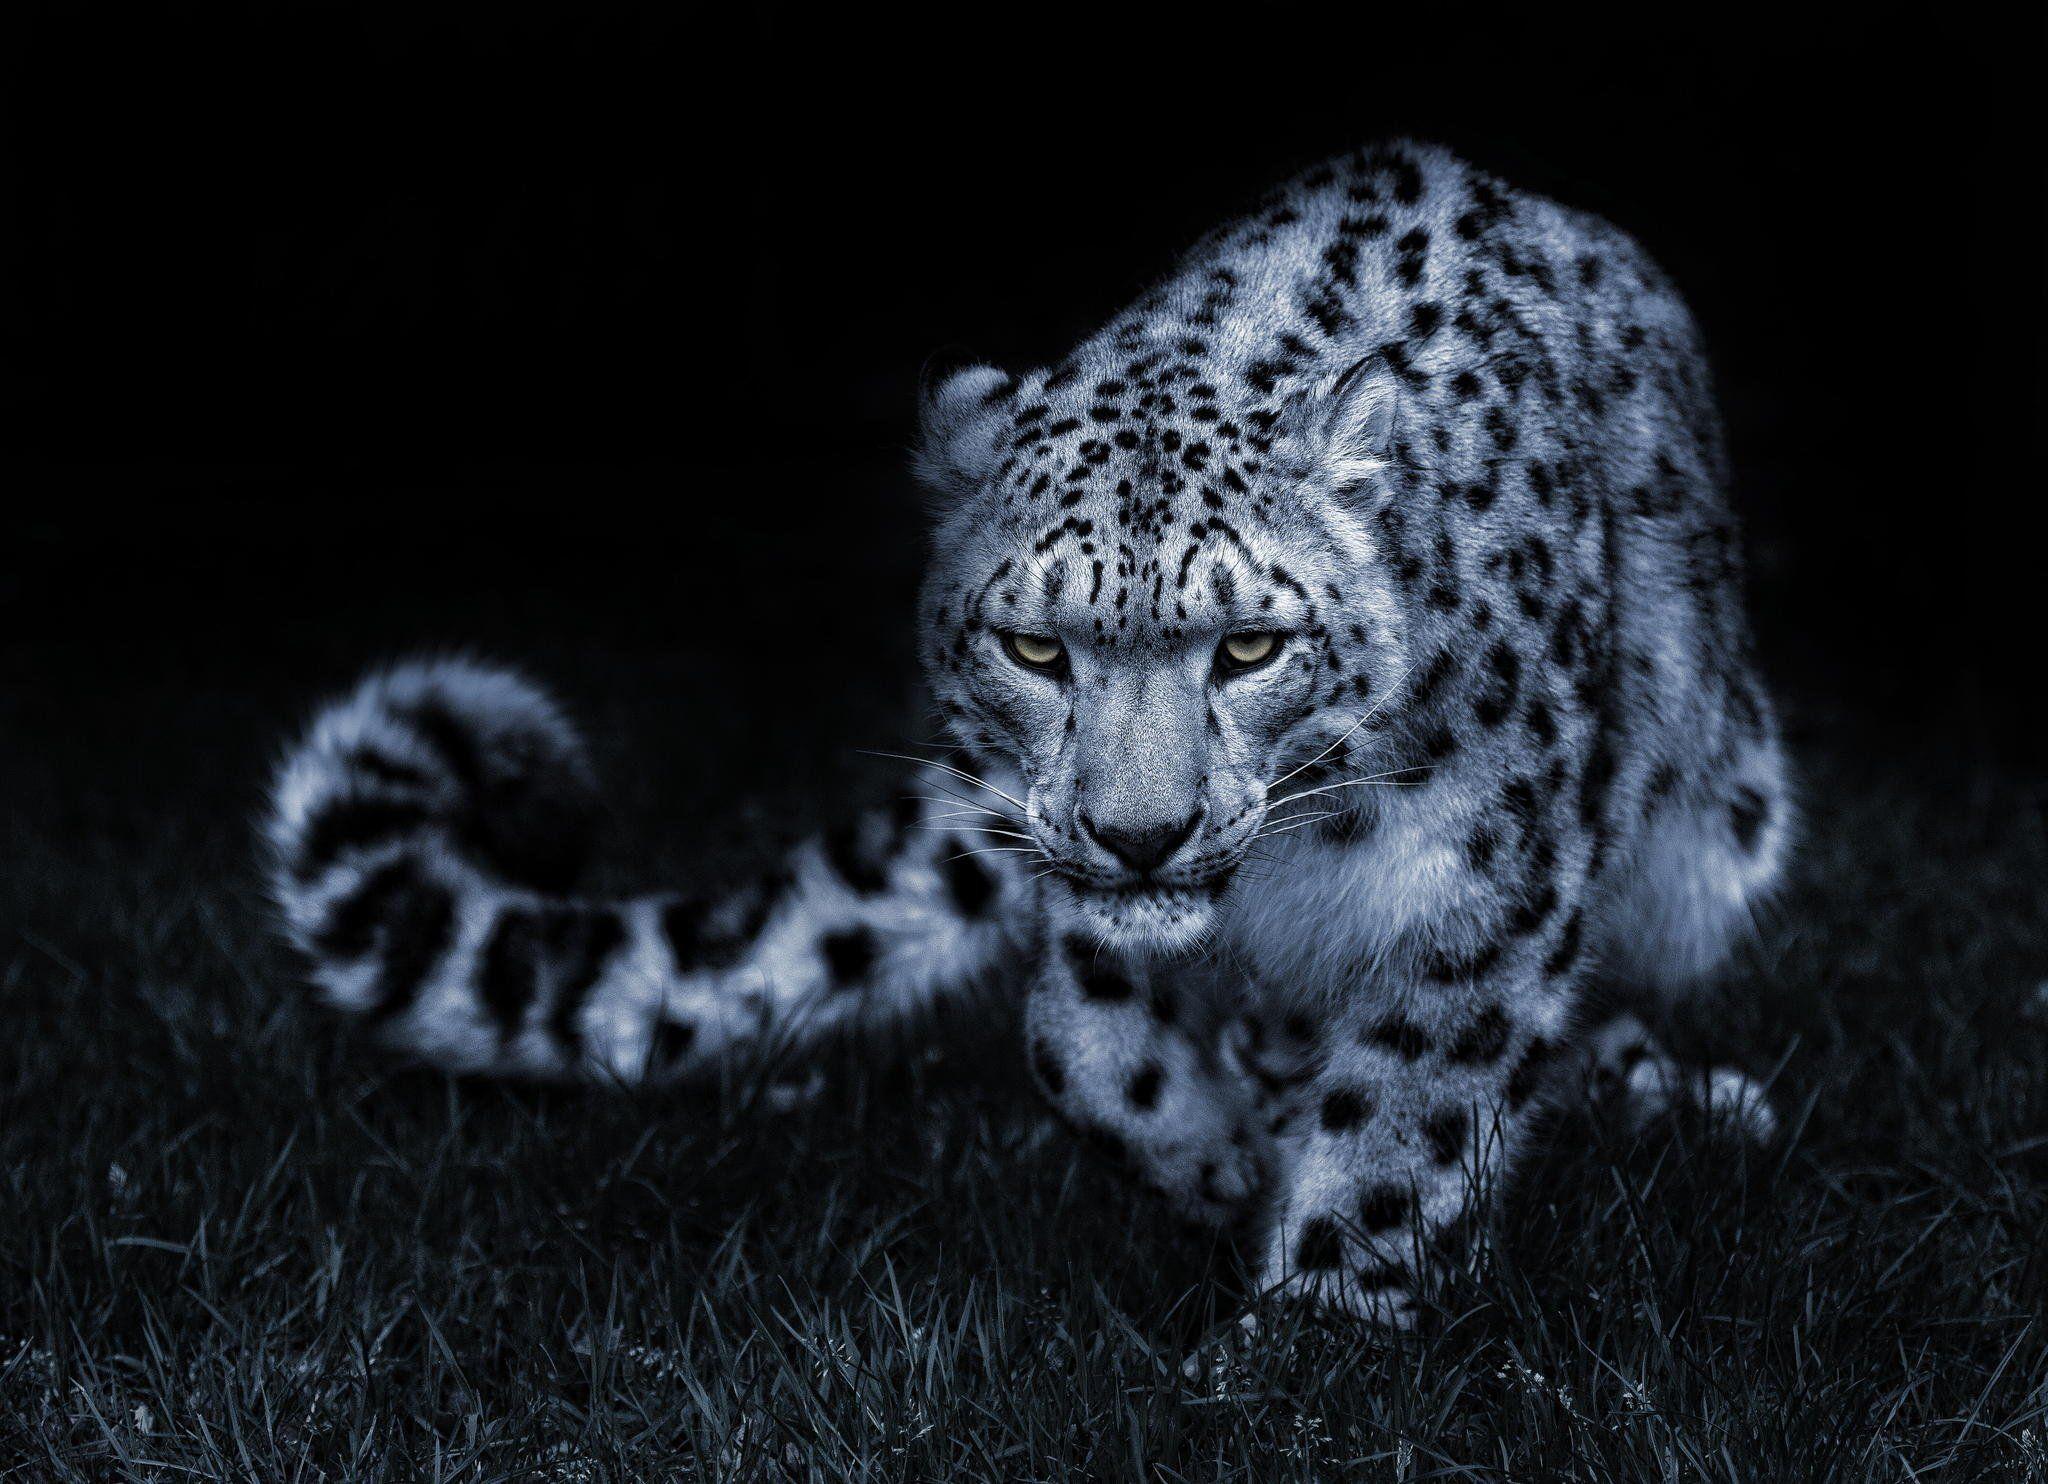 Snow leopard black and white posture eyes cat wallpaper